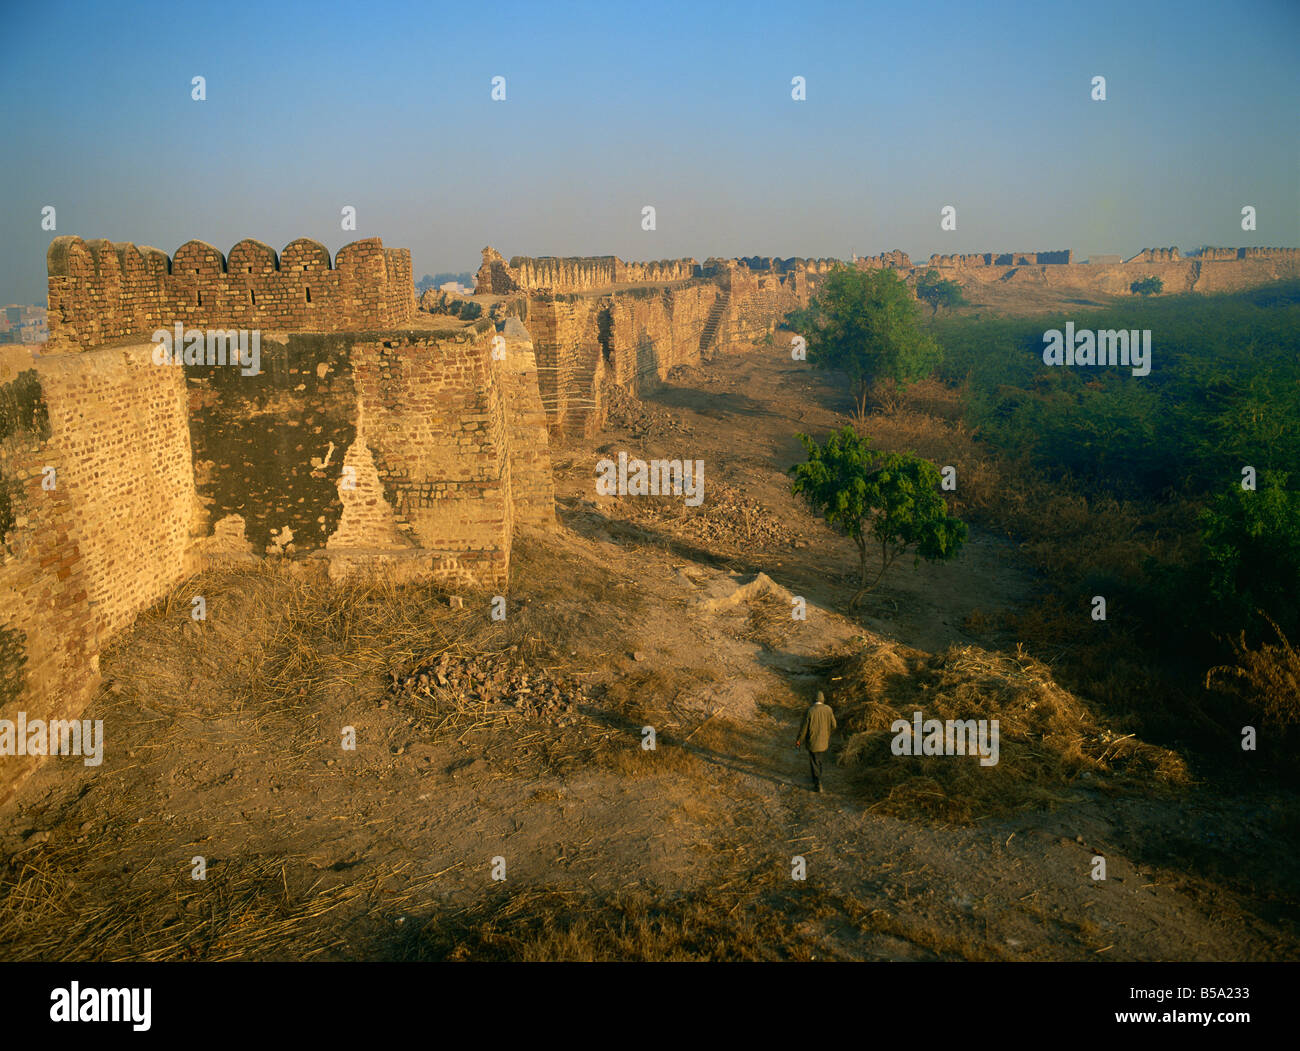 Section of walls inside Fort said to date from the 4th century Nagaur Fort Rajasthan state India Asia Stock Photo